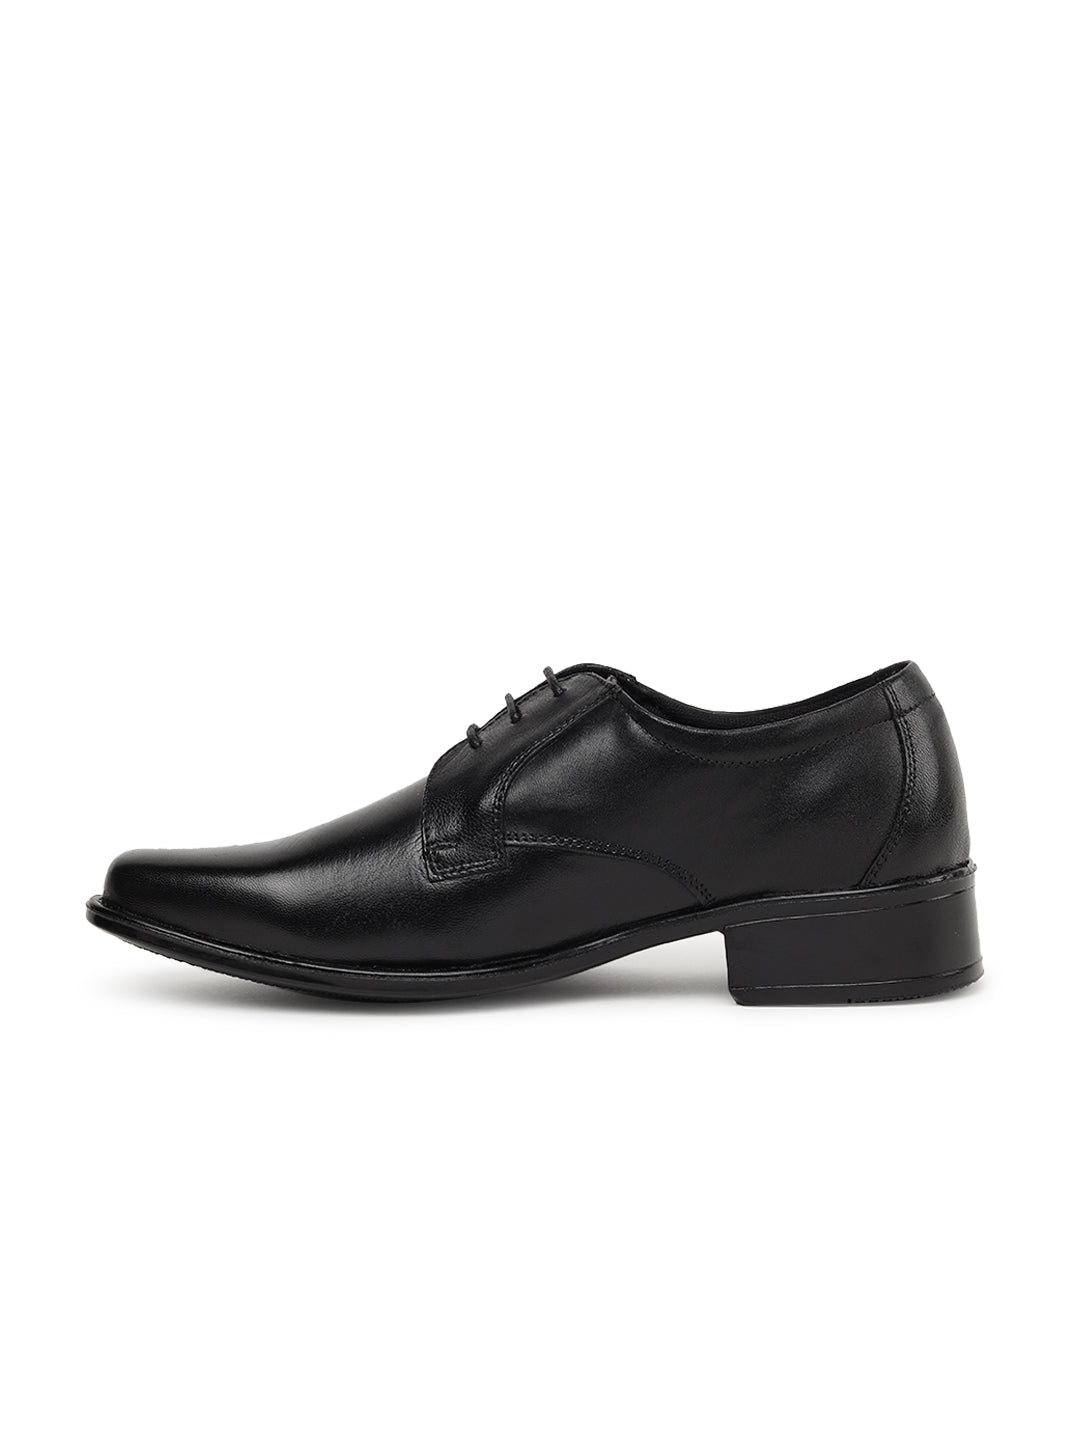 Paragon R11227G Men Formal Shoes | Corporate Office Shoes | Smart &amp; Sleek Design | Comfortable Sole with Cushioning | Daily &amp; Occasion Wear